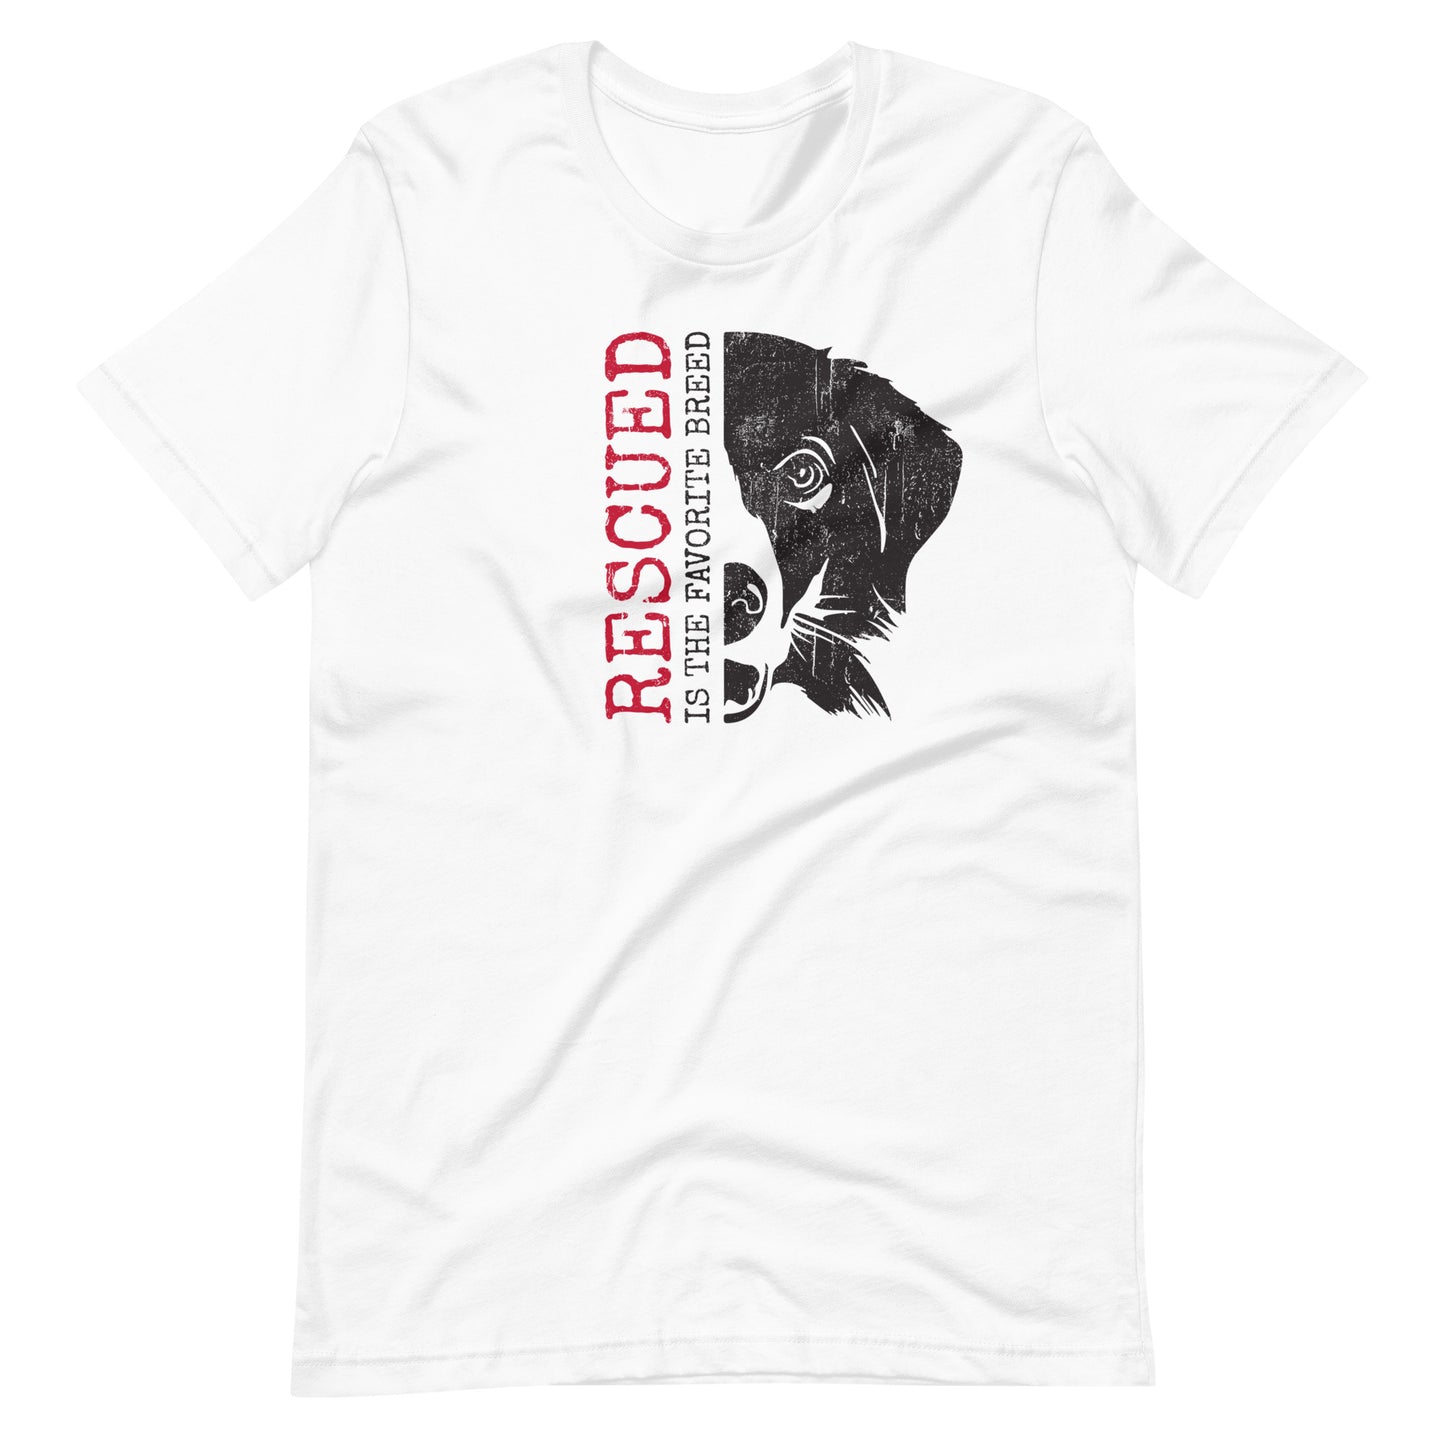 Rescued Is The Favorite Breed - Unisex Tee